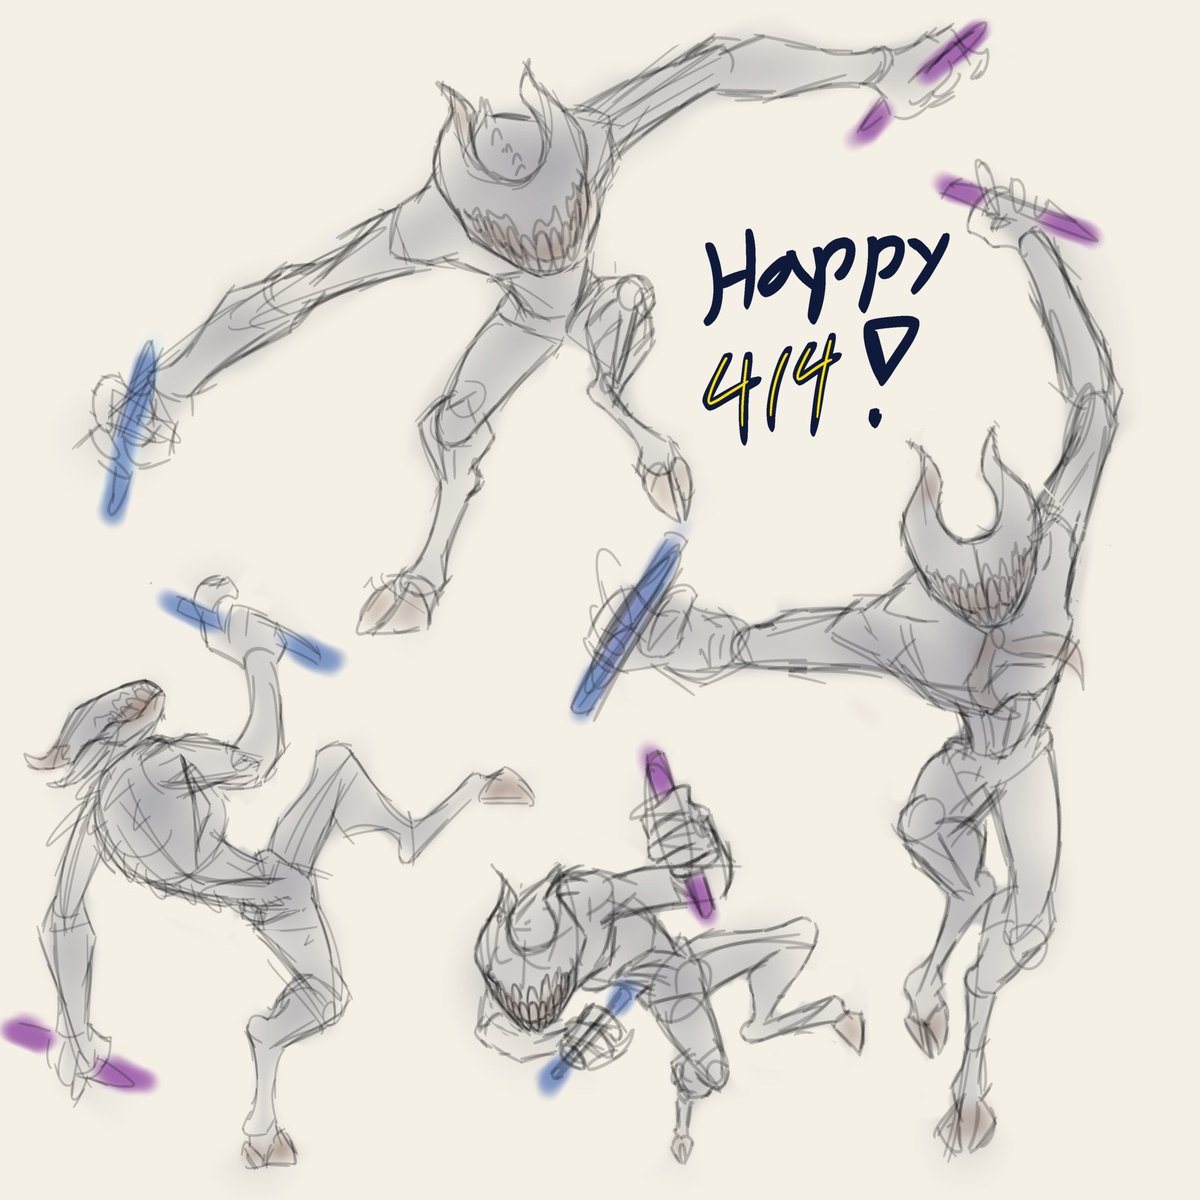 Secrets of the machine spoilers?
.
.
.
.
.
.
.
.
.
.
.
.
.
.
He looks so happy
Dude can bust a move
Happy 414!
#BENDYSECRETSOFTHEMACHINE